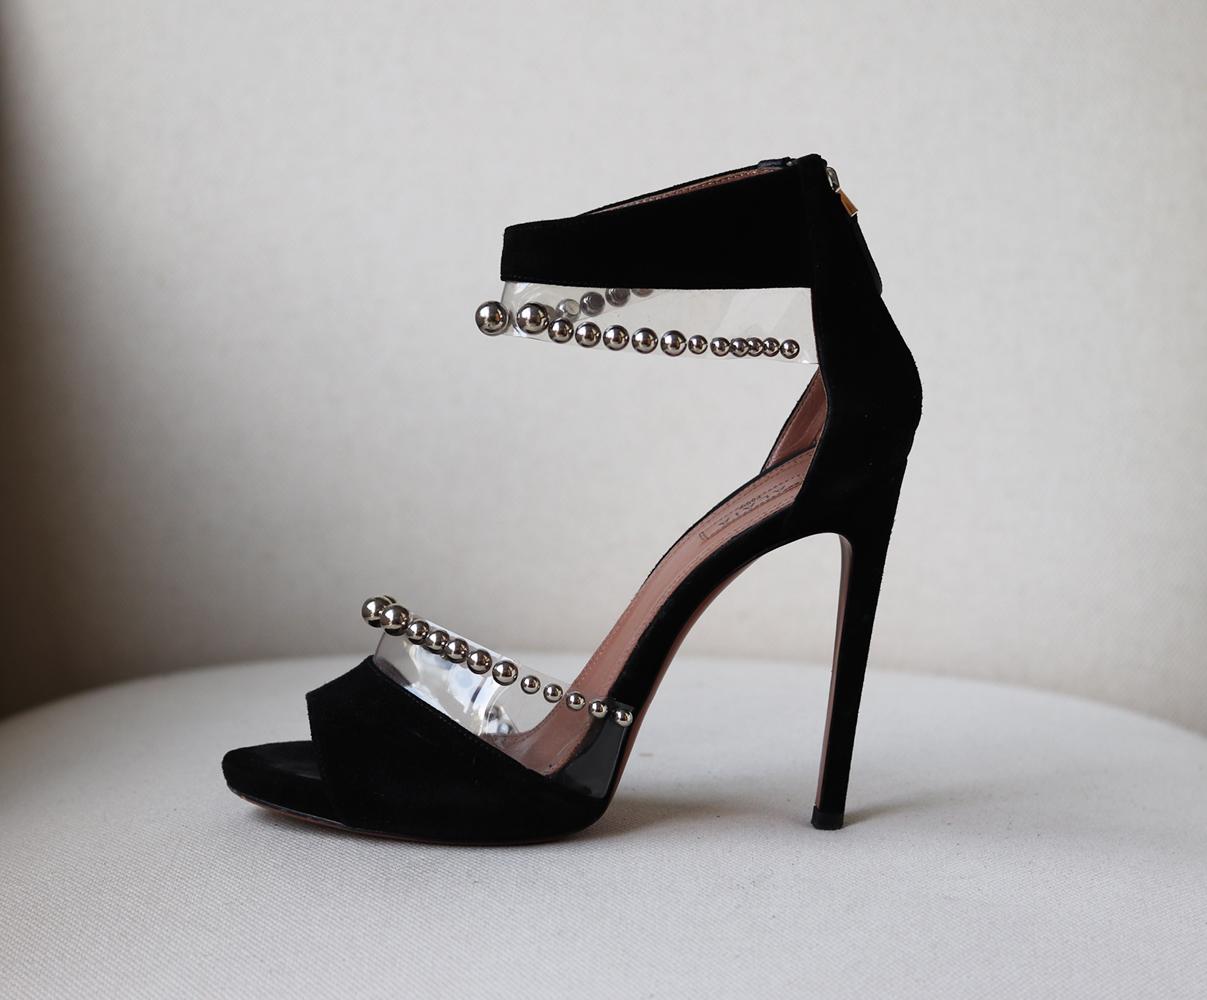 Azzedine Alaïa beaded sandals have been crafted in Italy from black suede and finished with silver-tone bead embellished PVC straps that mimic the label's signature laser-cut patterns. 
Heel measures approximately 110 mm/ 4.5 inches.
Black